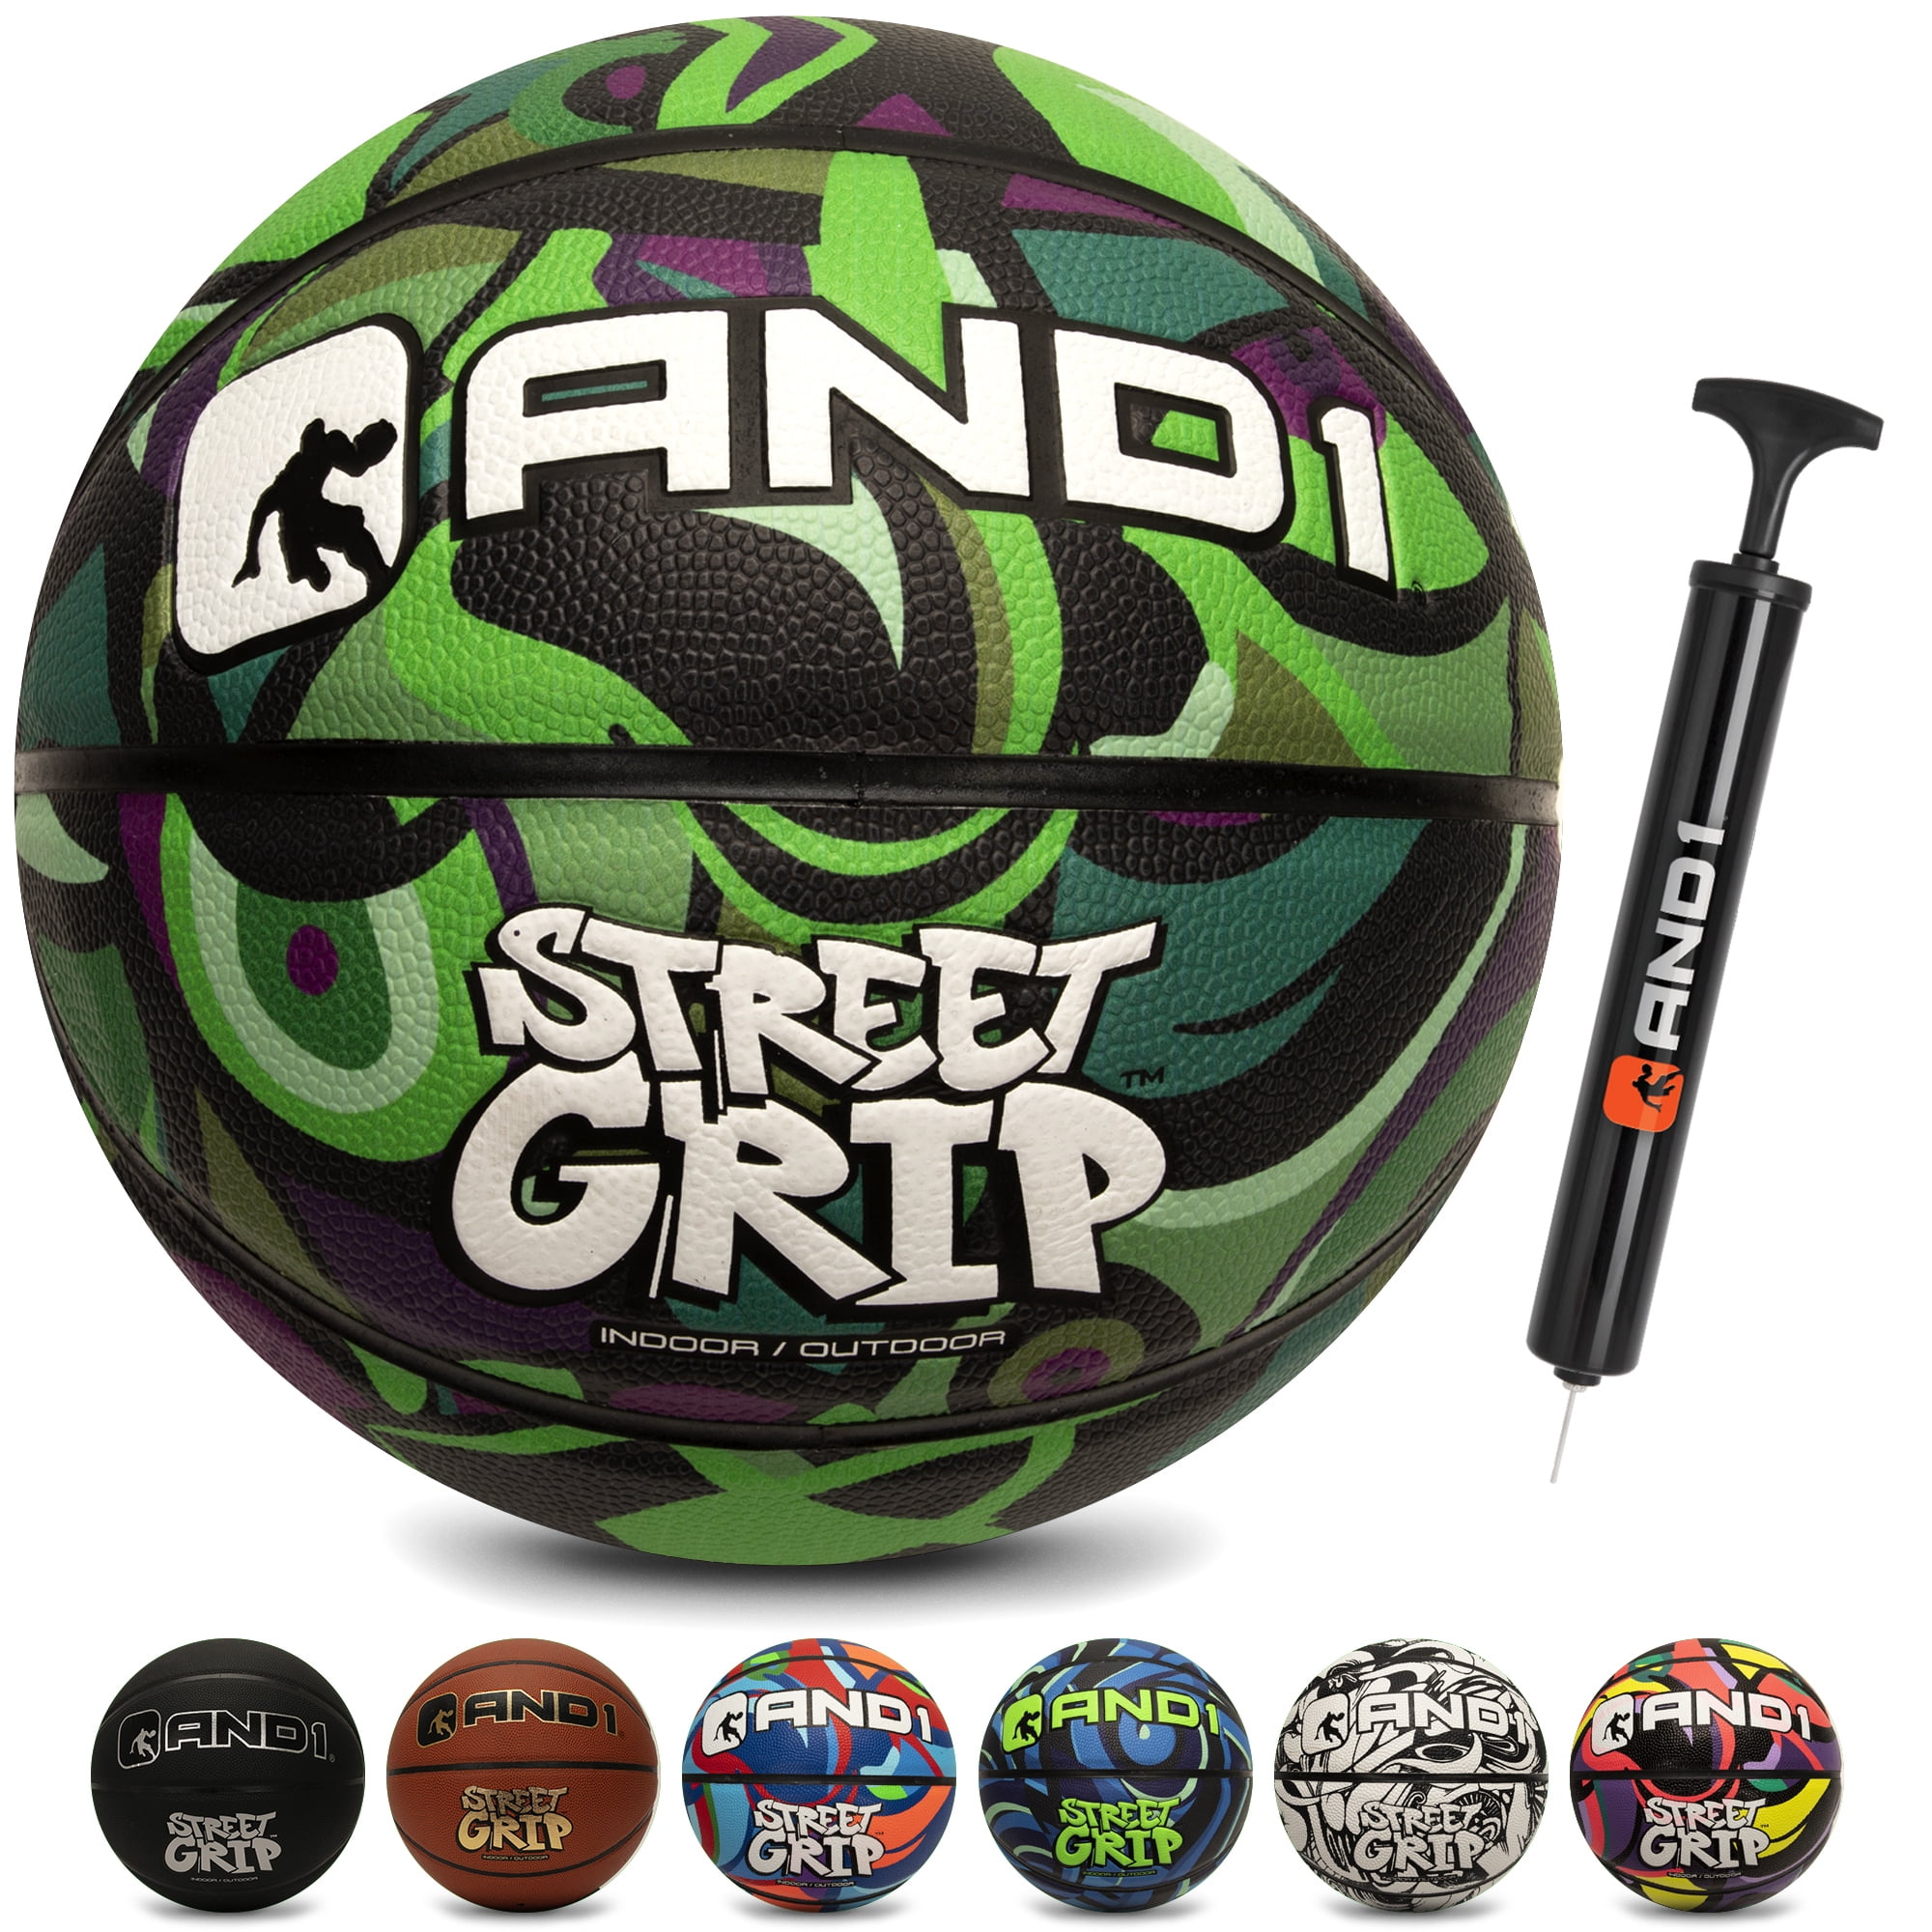 And1 Enigma Street Basketball Official Size 7 Wide Channel Grip Ball New 29.5 